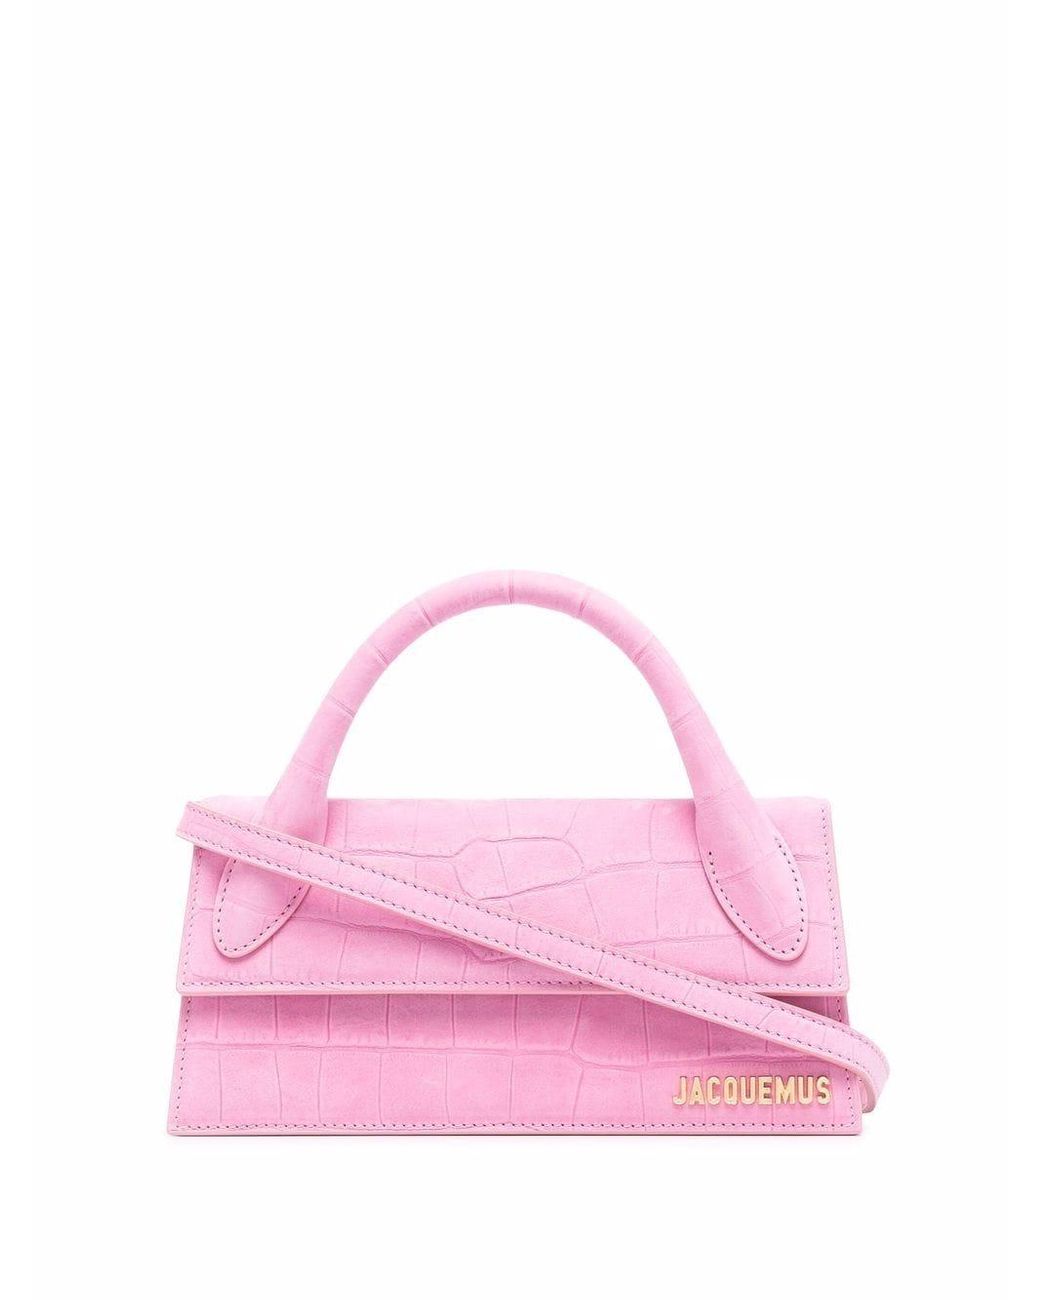 Jacquemus Le Chiquito Long Crocodile-effect Tote Bag in Pink | Lyst